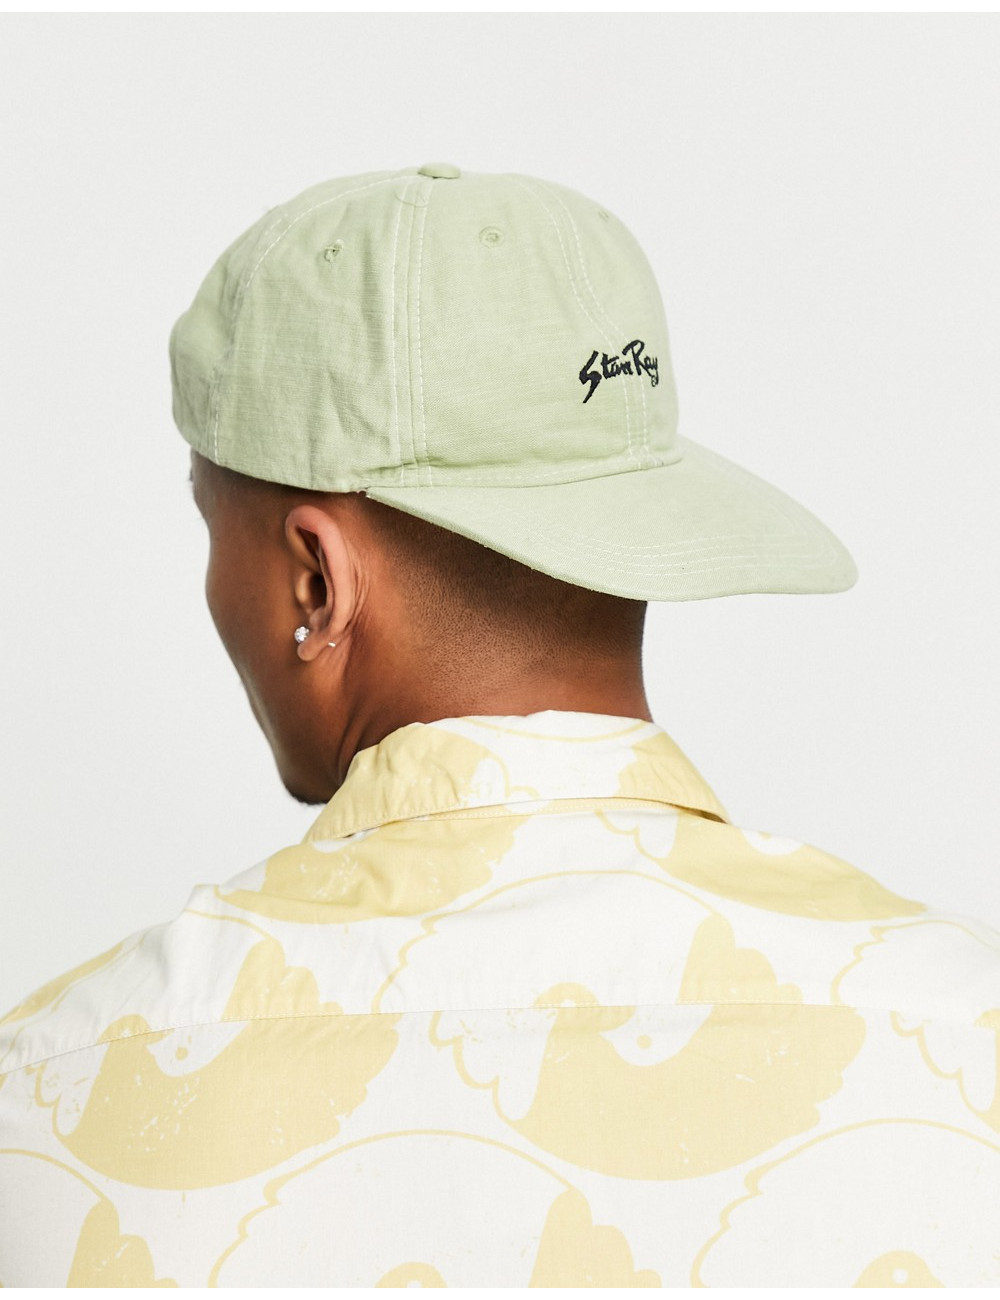 Stan Ray baseball cap with...